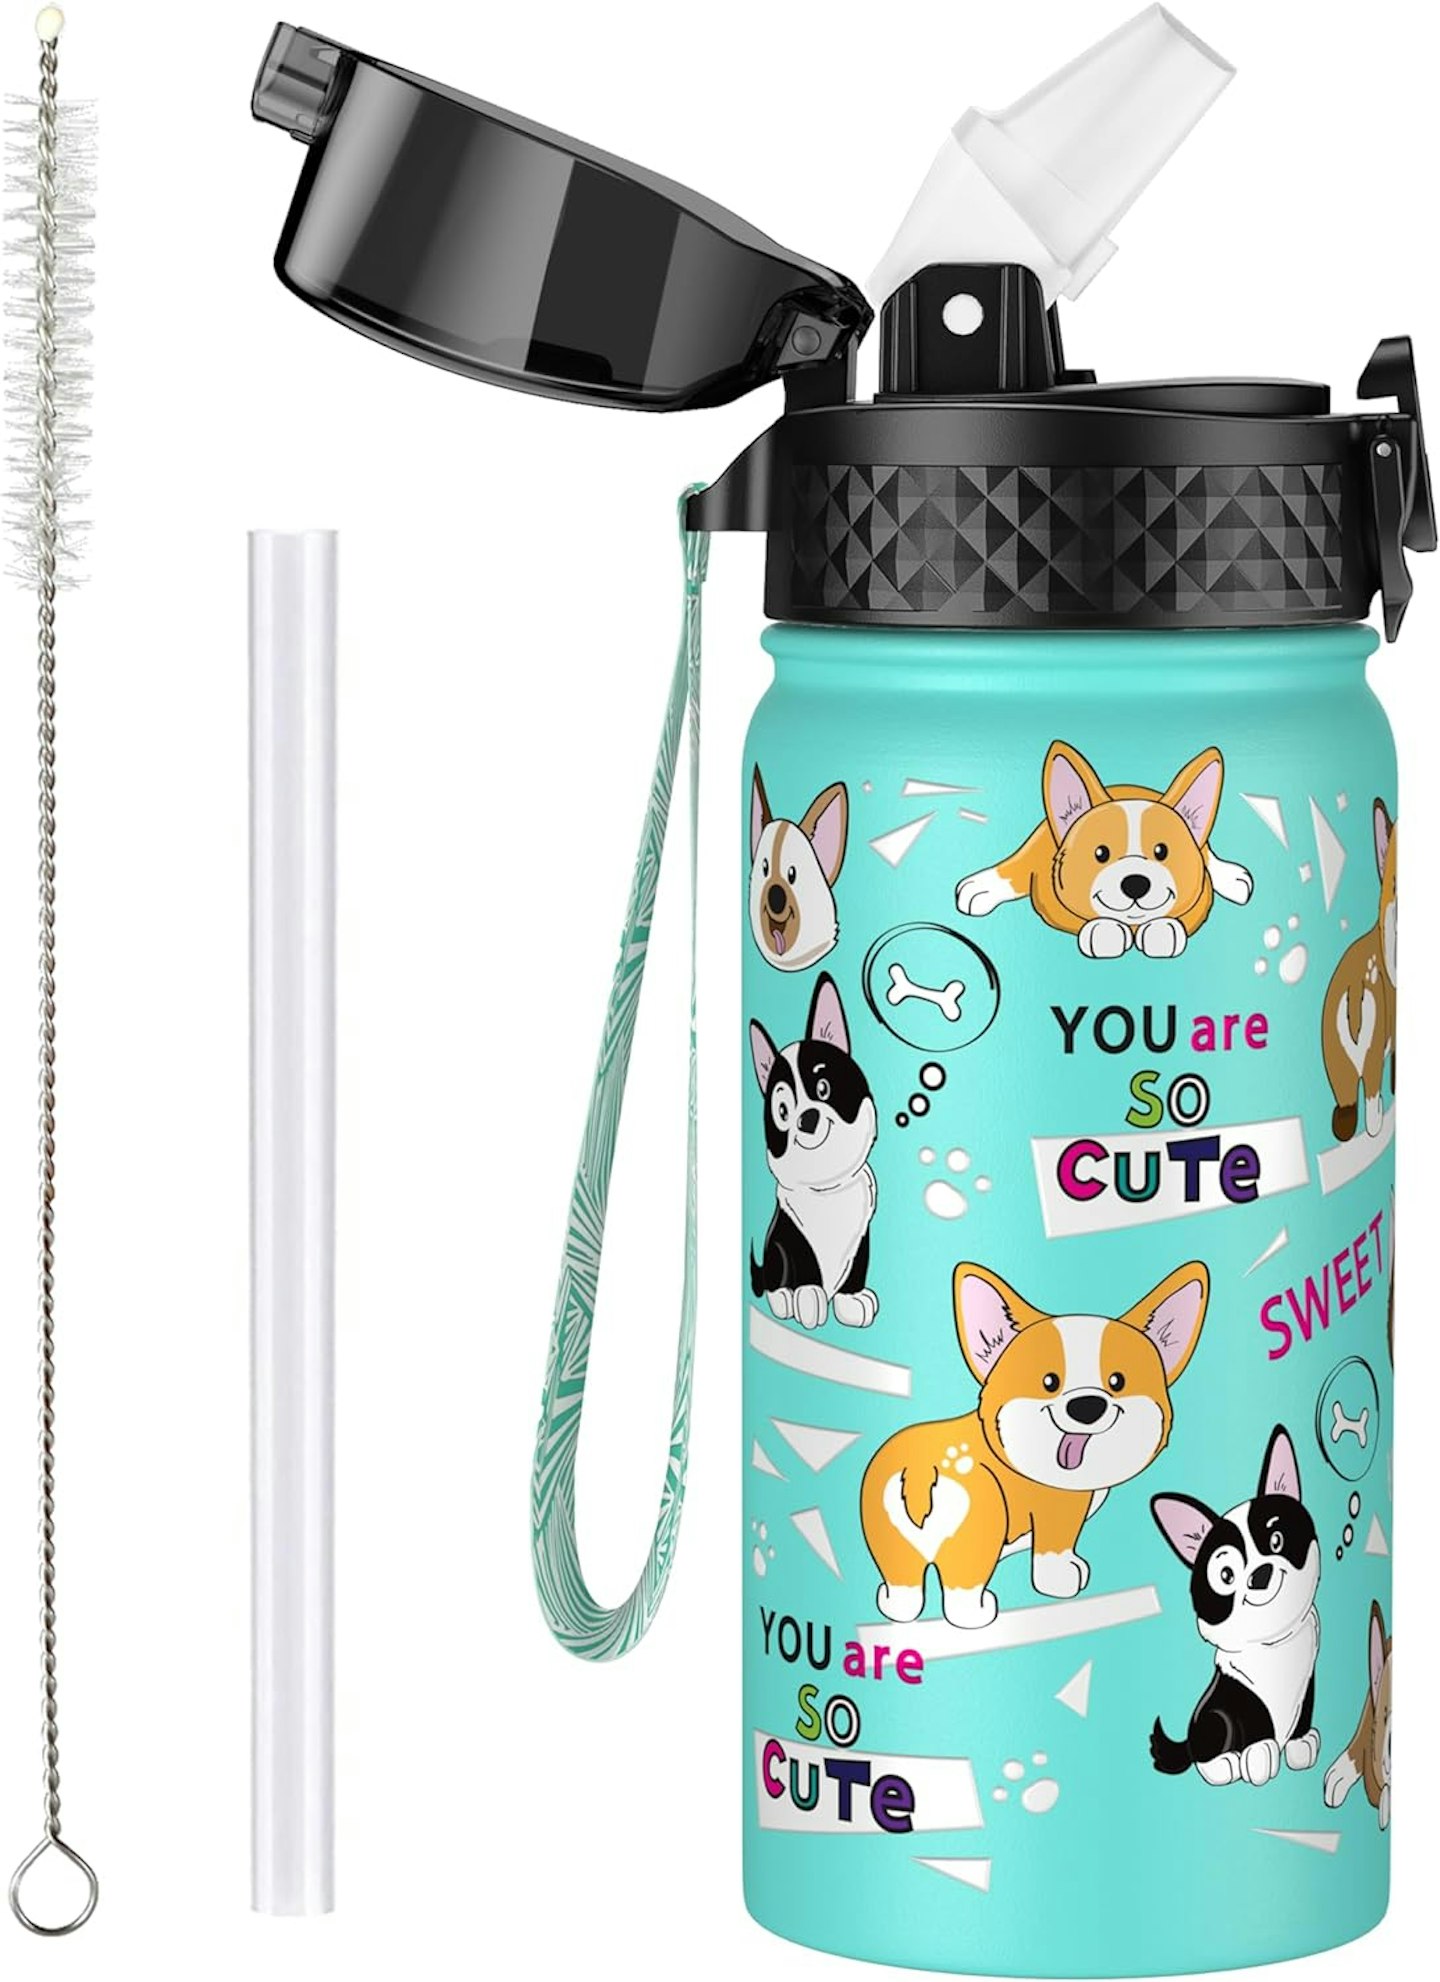 Child's water bottle with cute dog design, includes removable straw and straw cleaning brush